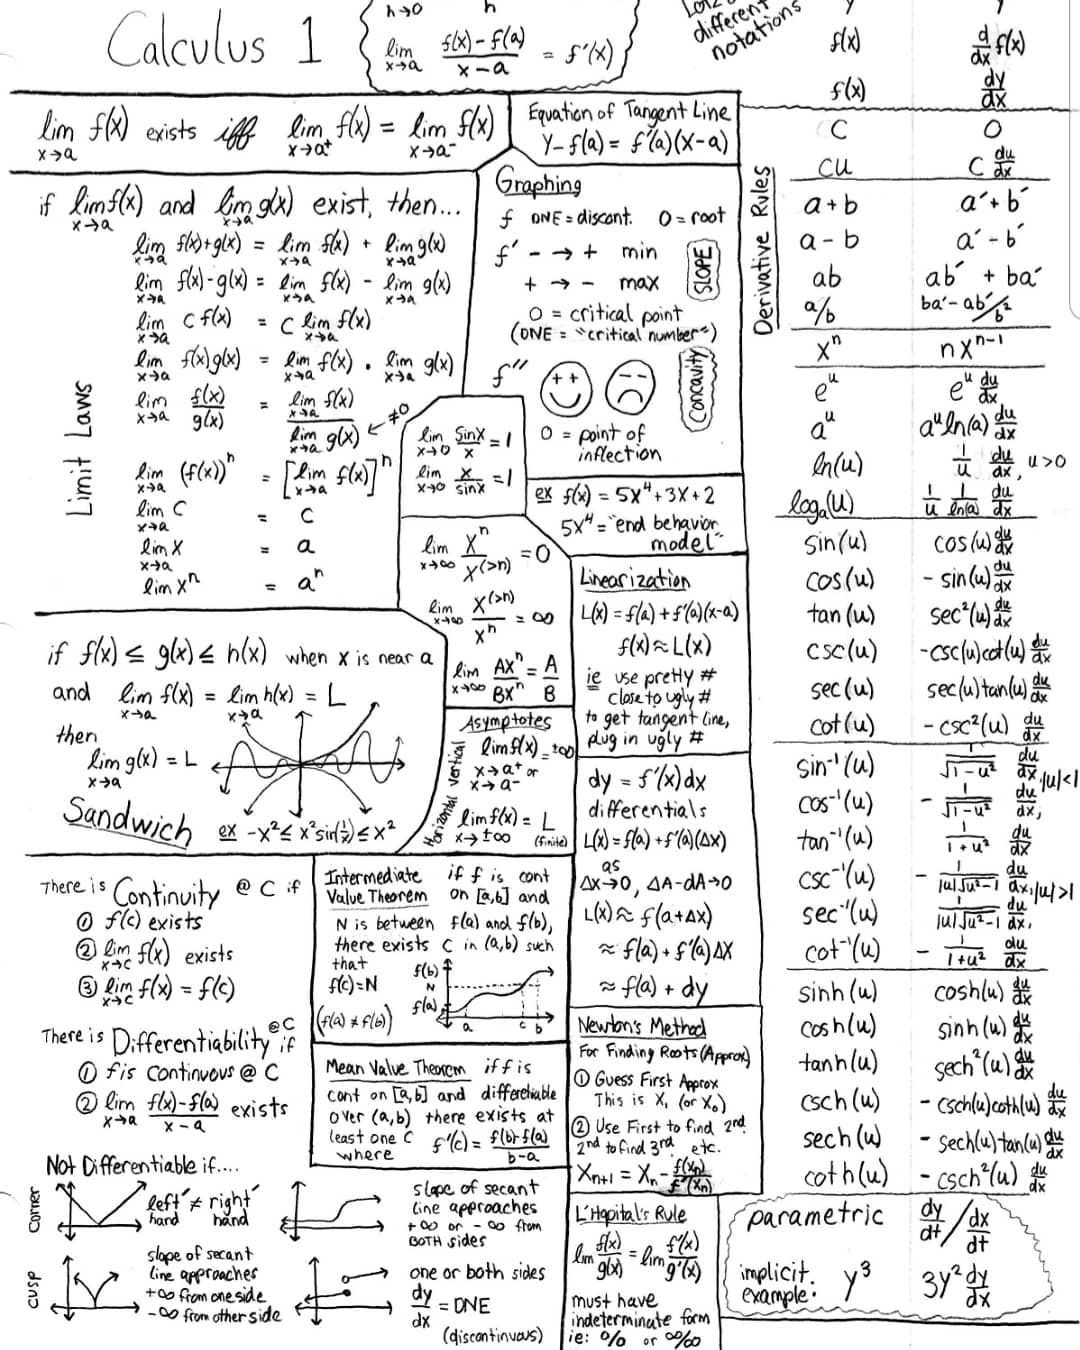 Awesome Calculus Derivative Rules Worksheet Labelco